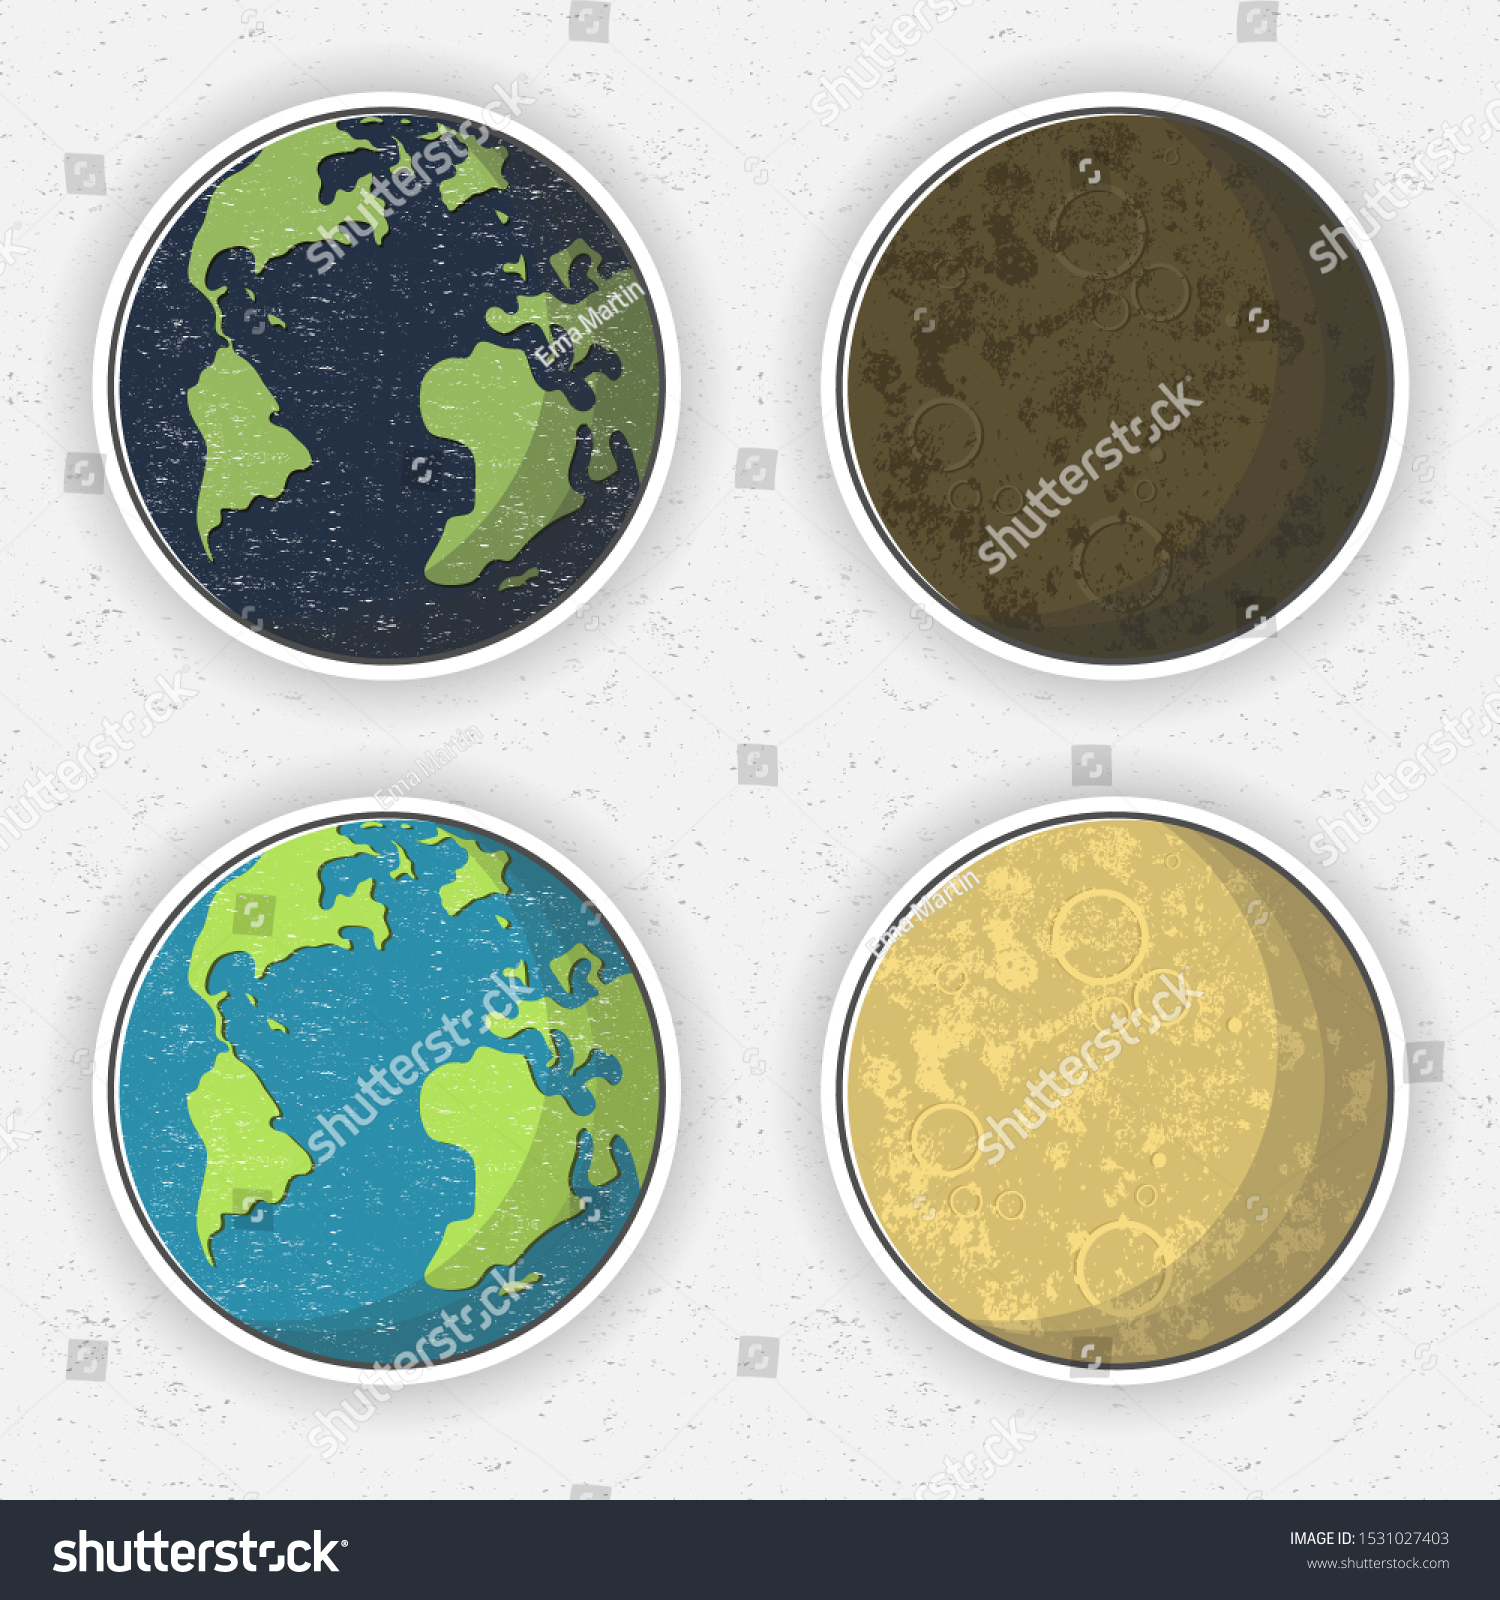 Planet Earth Moon Solar System Set Stock Vector (Royalty Free ...